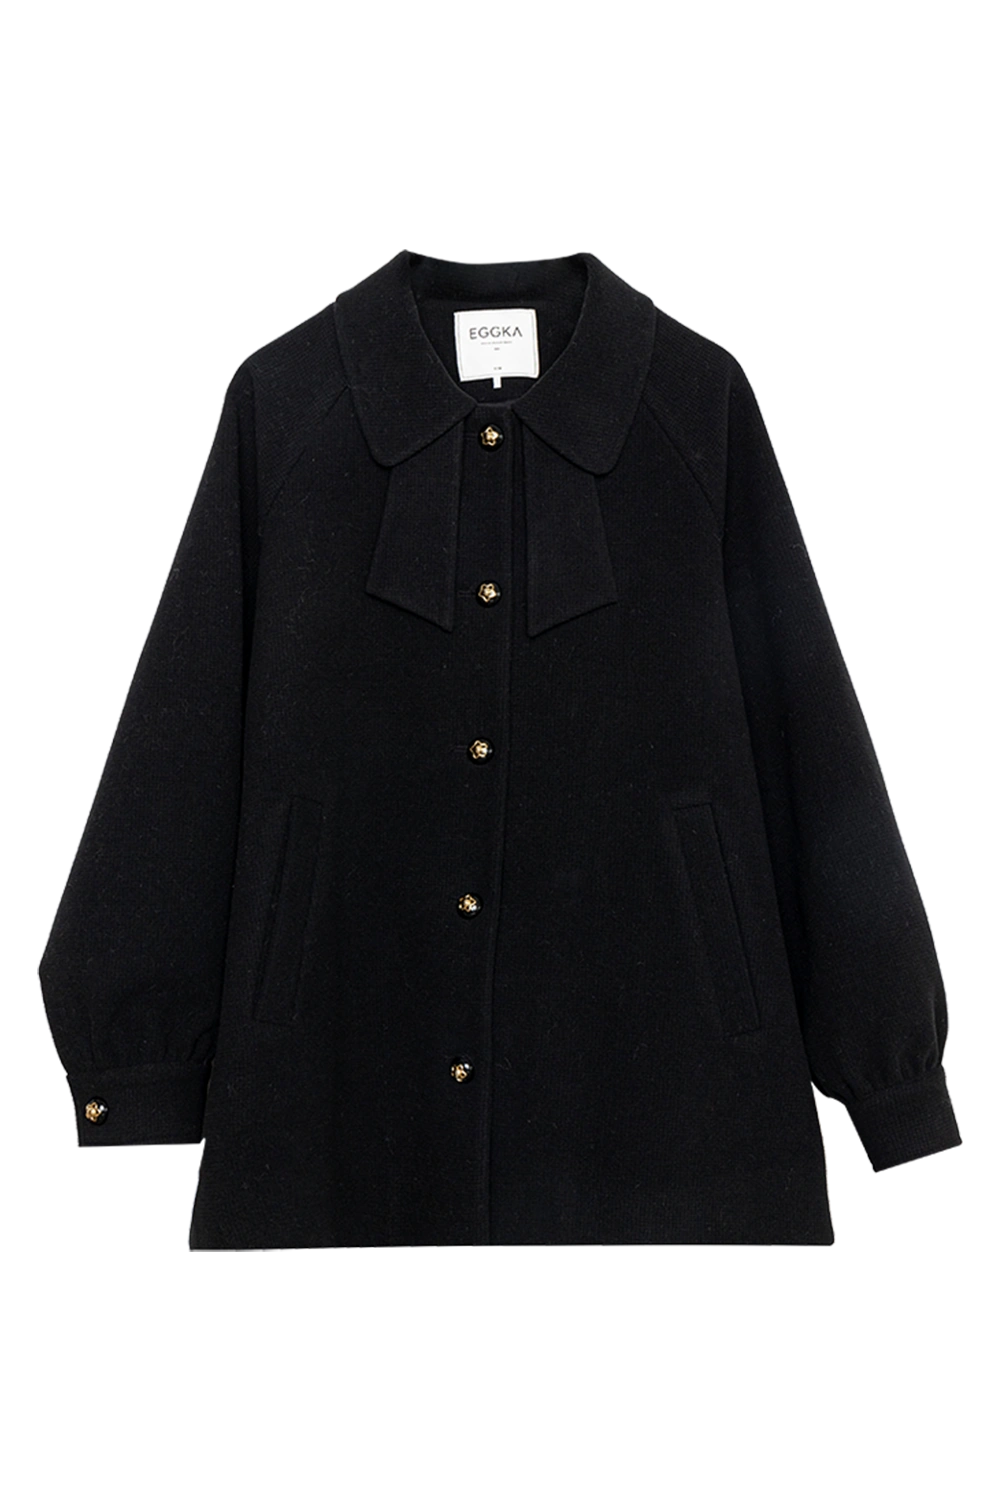 Women's Black Wool Blend Coat with Bow Collar and Button Front